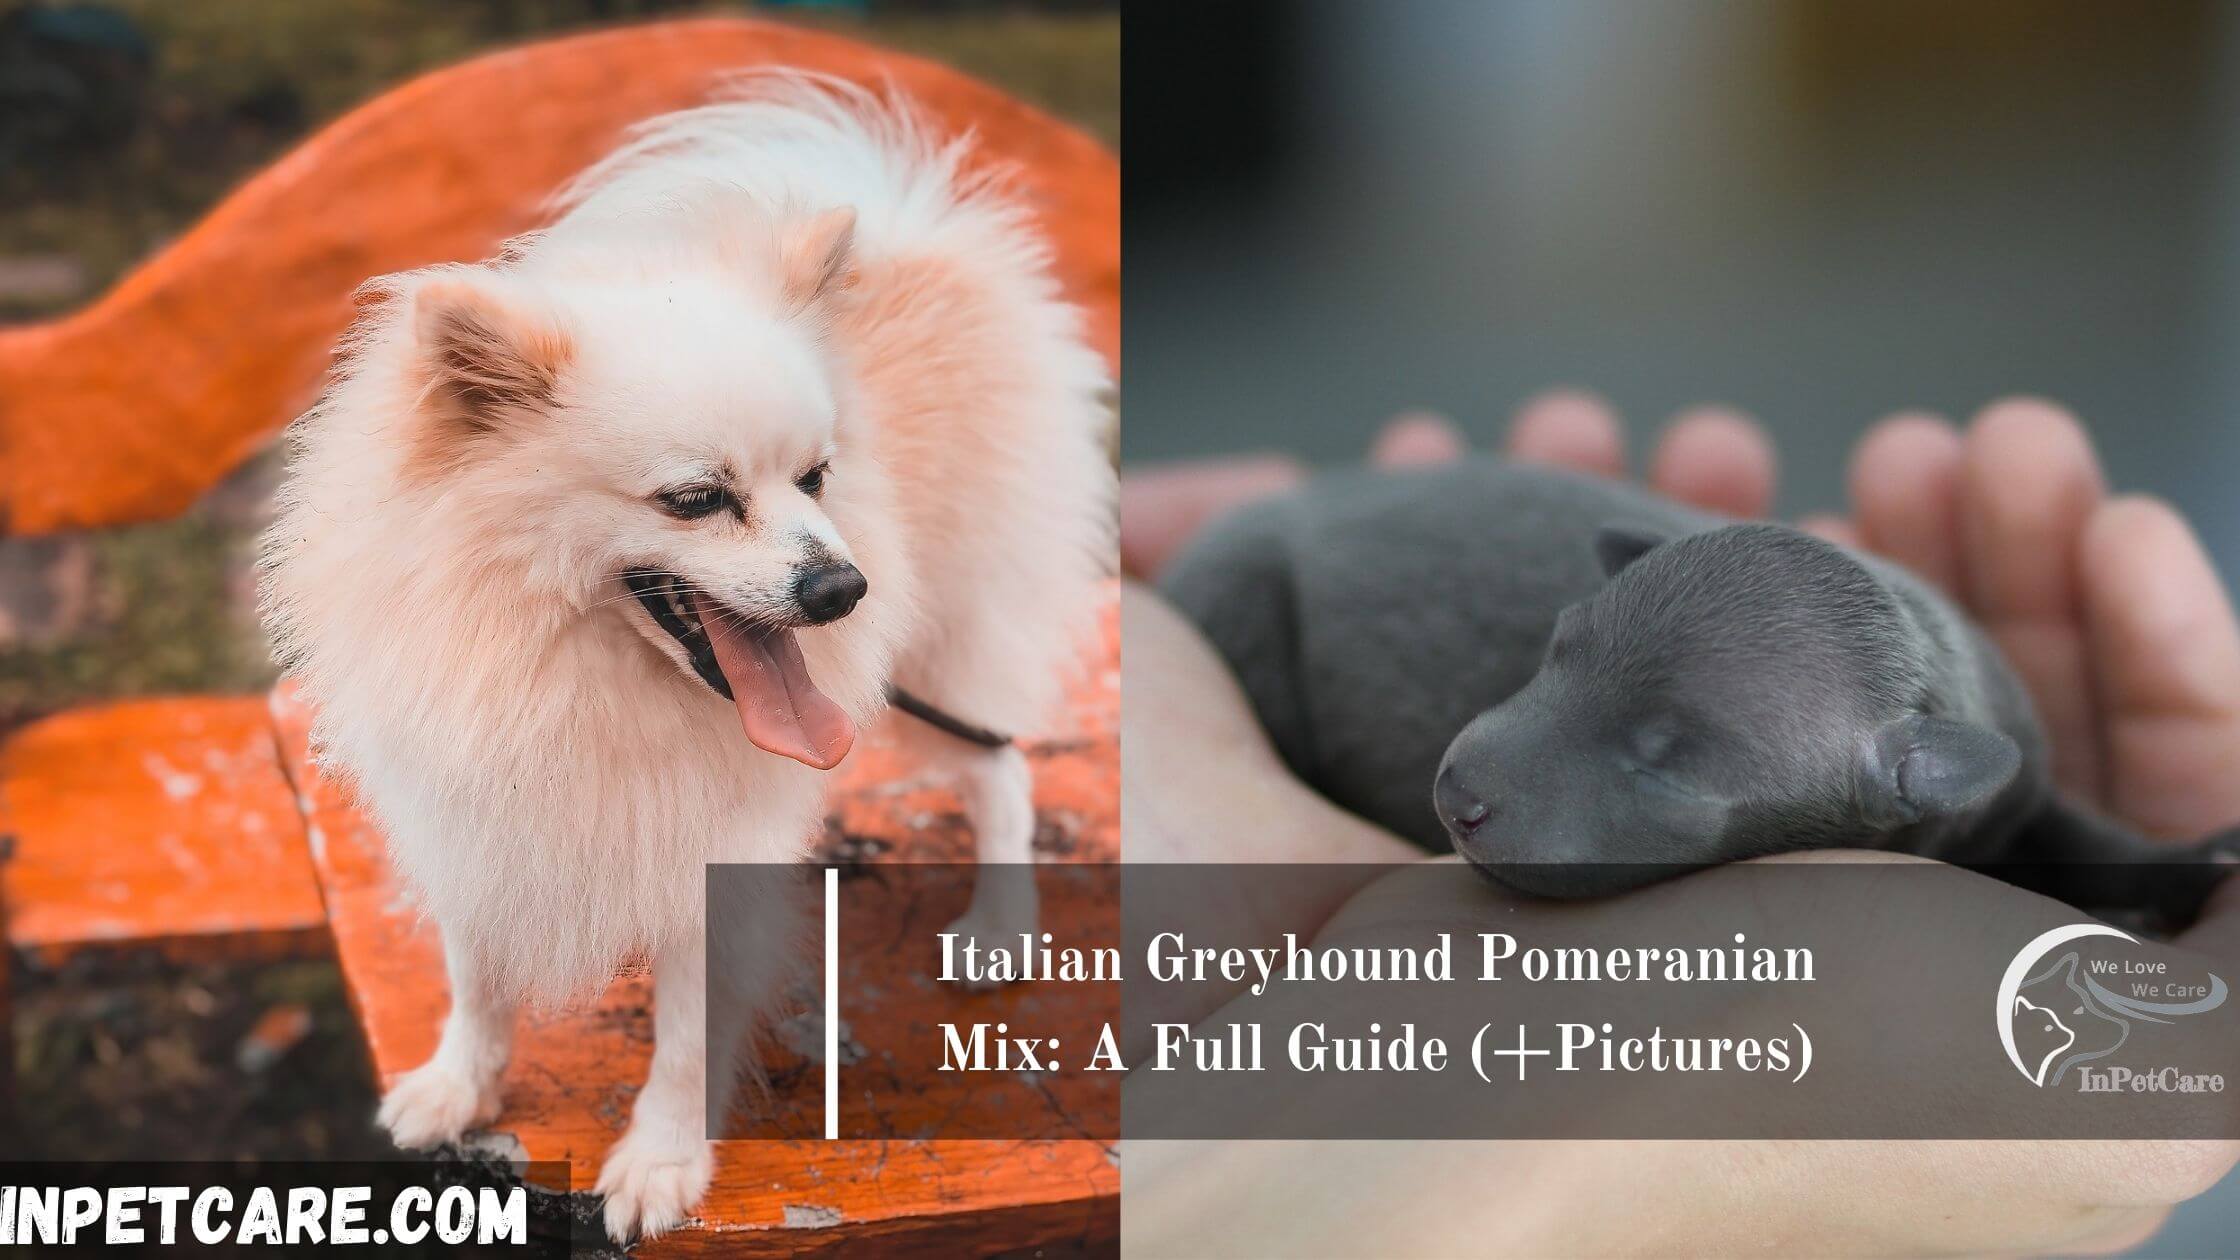 Italian Greyhound Pomeranian Mix: A Full Guide (+Pictures)